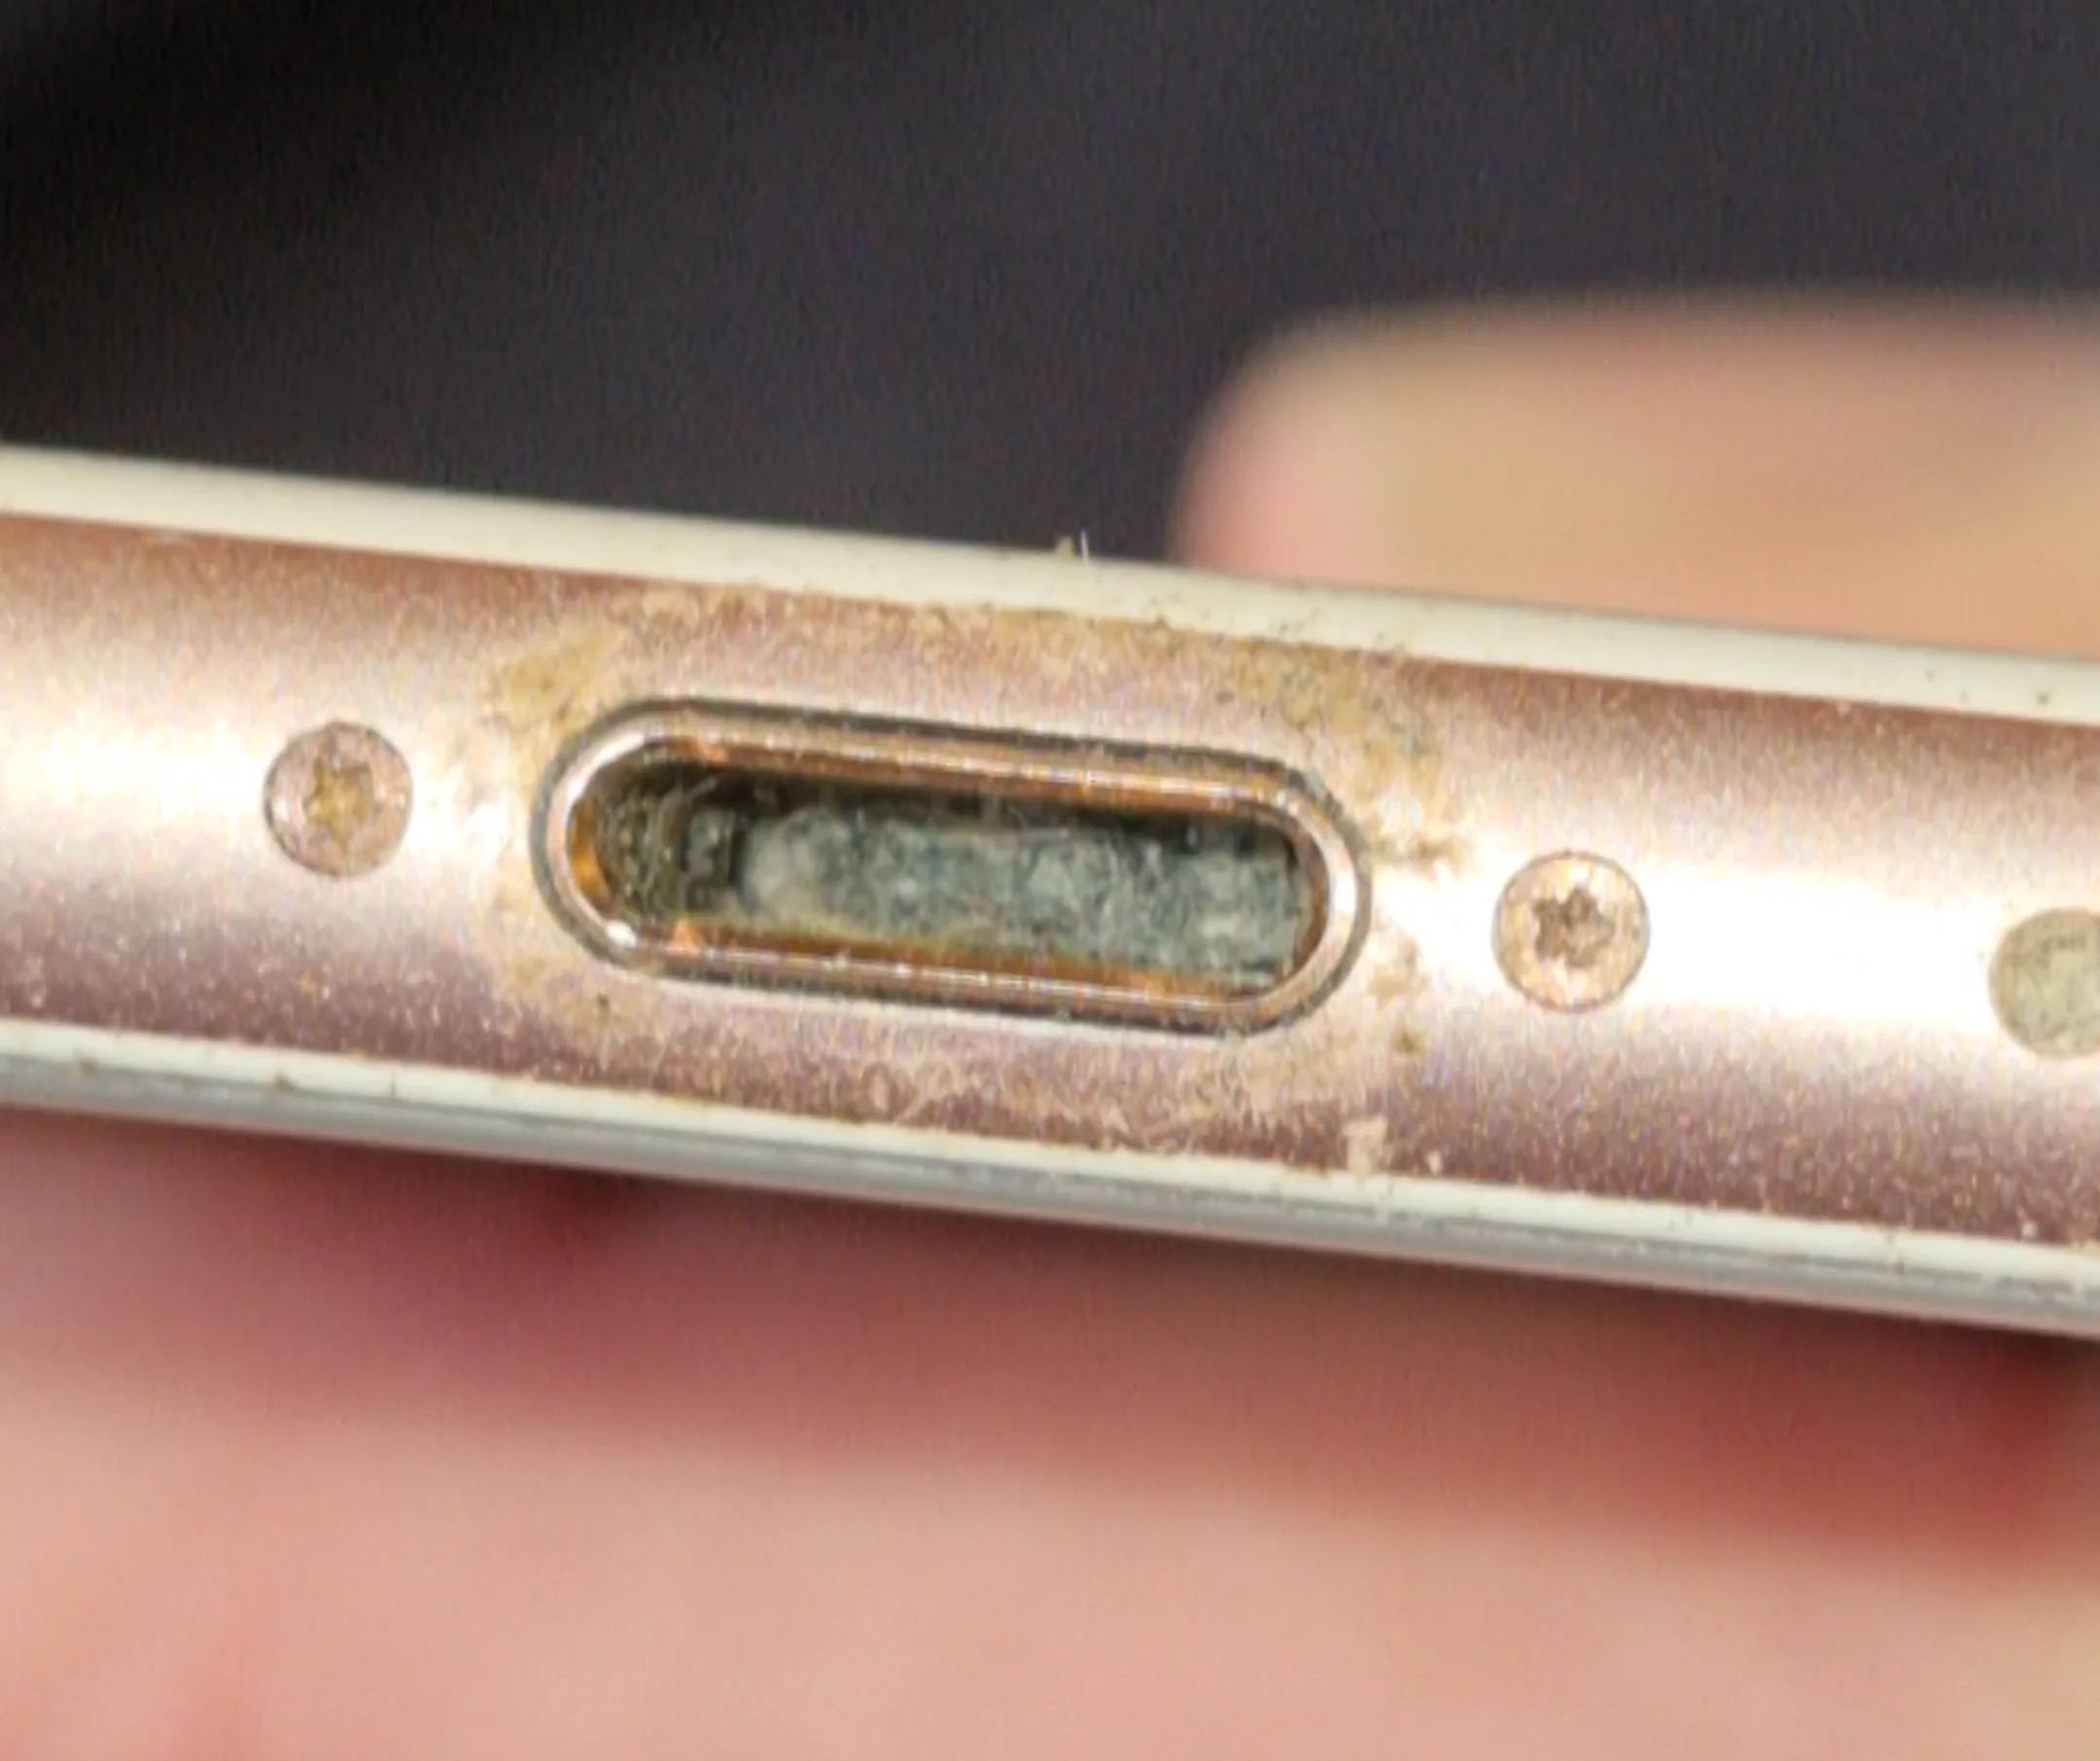 Dirty iPhone charging port